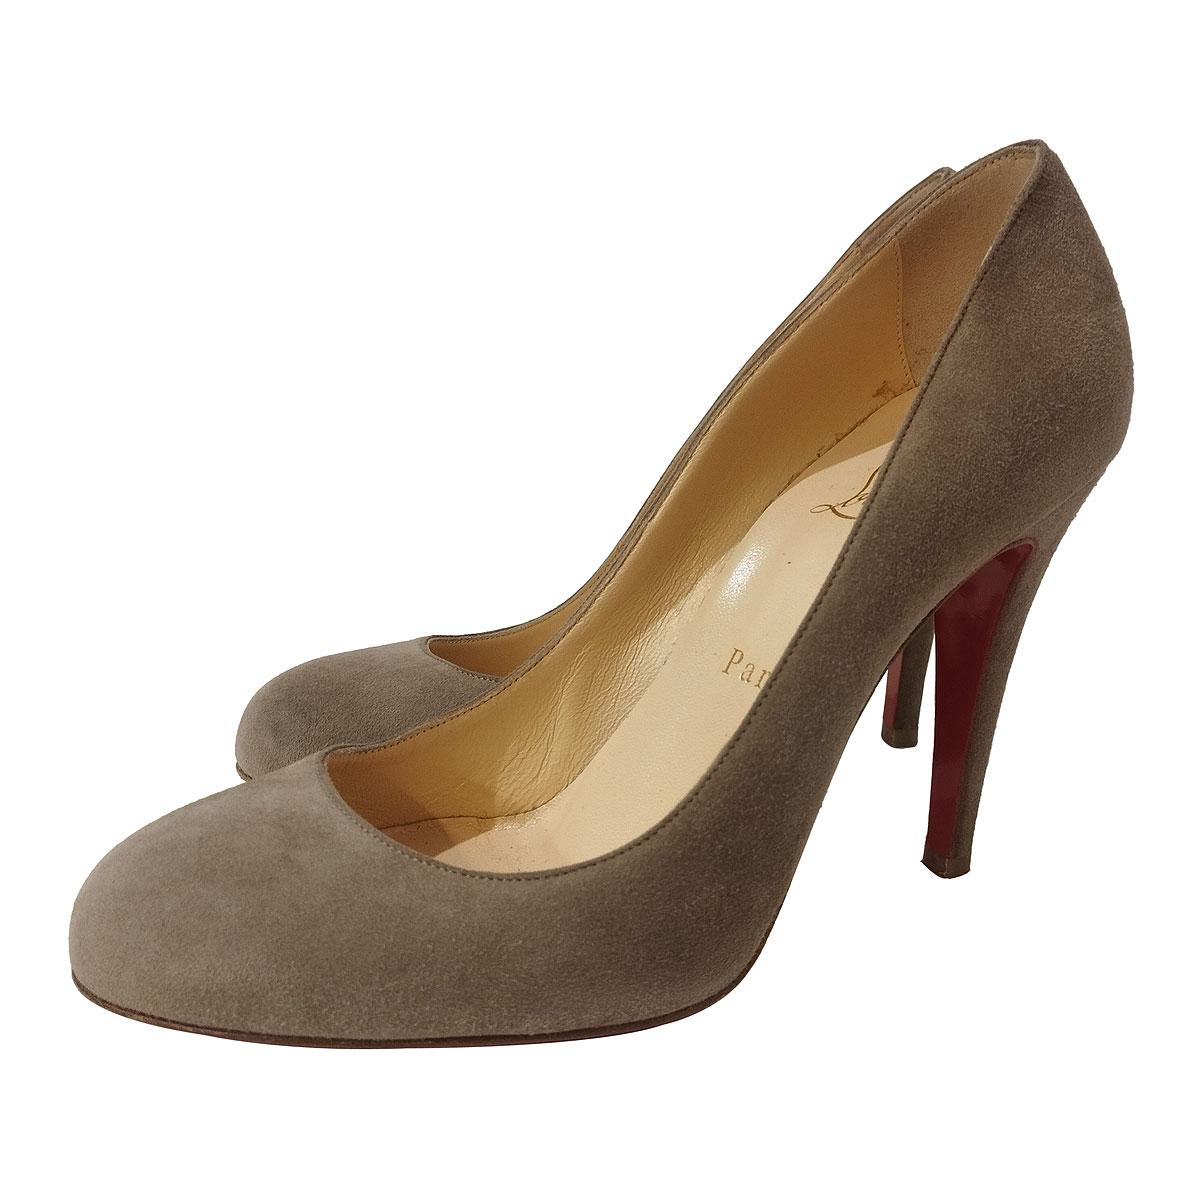 Beautiful and chic Louboutin's décolleté
Suede
Grey color
Heel height cm 10 (3,93 inches)
Worldwide fast shipping included in the price